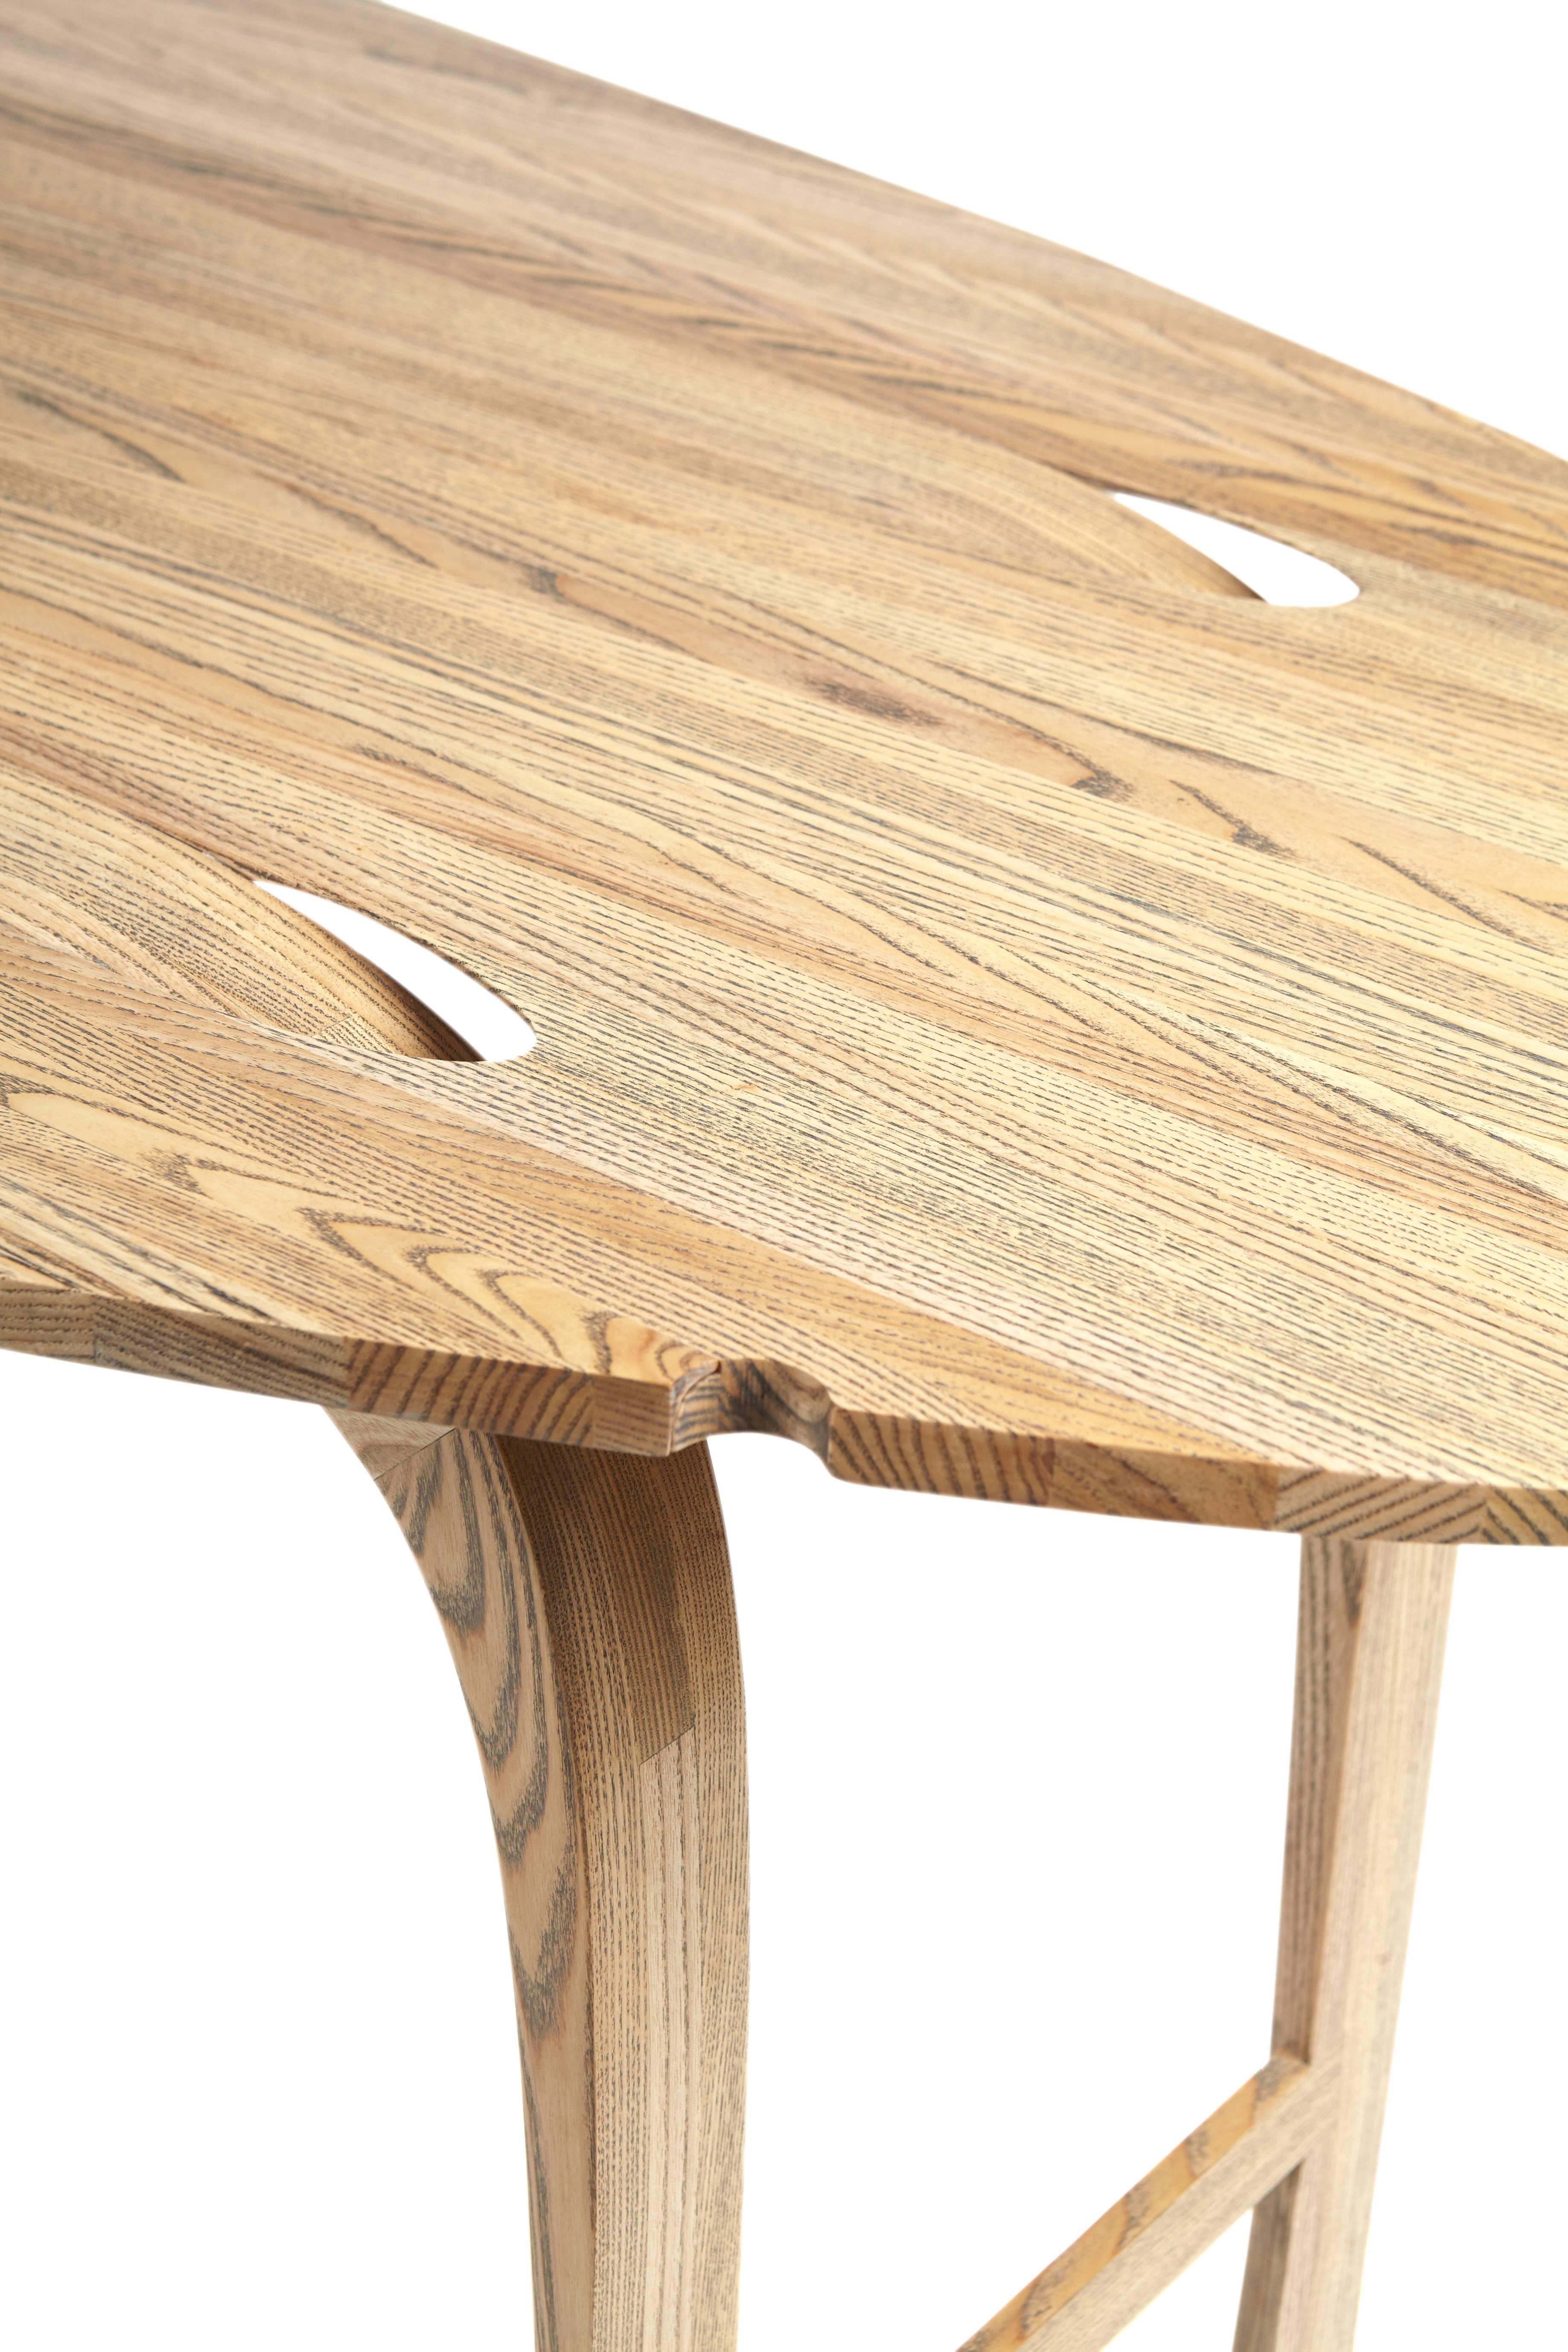 Modern Oval Drop-Leaf Table in solid ebony grain and white oil ash by Jonathan Field